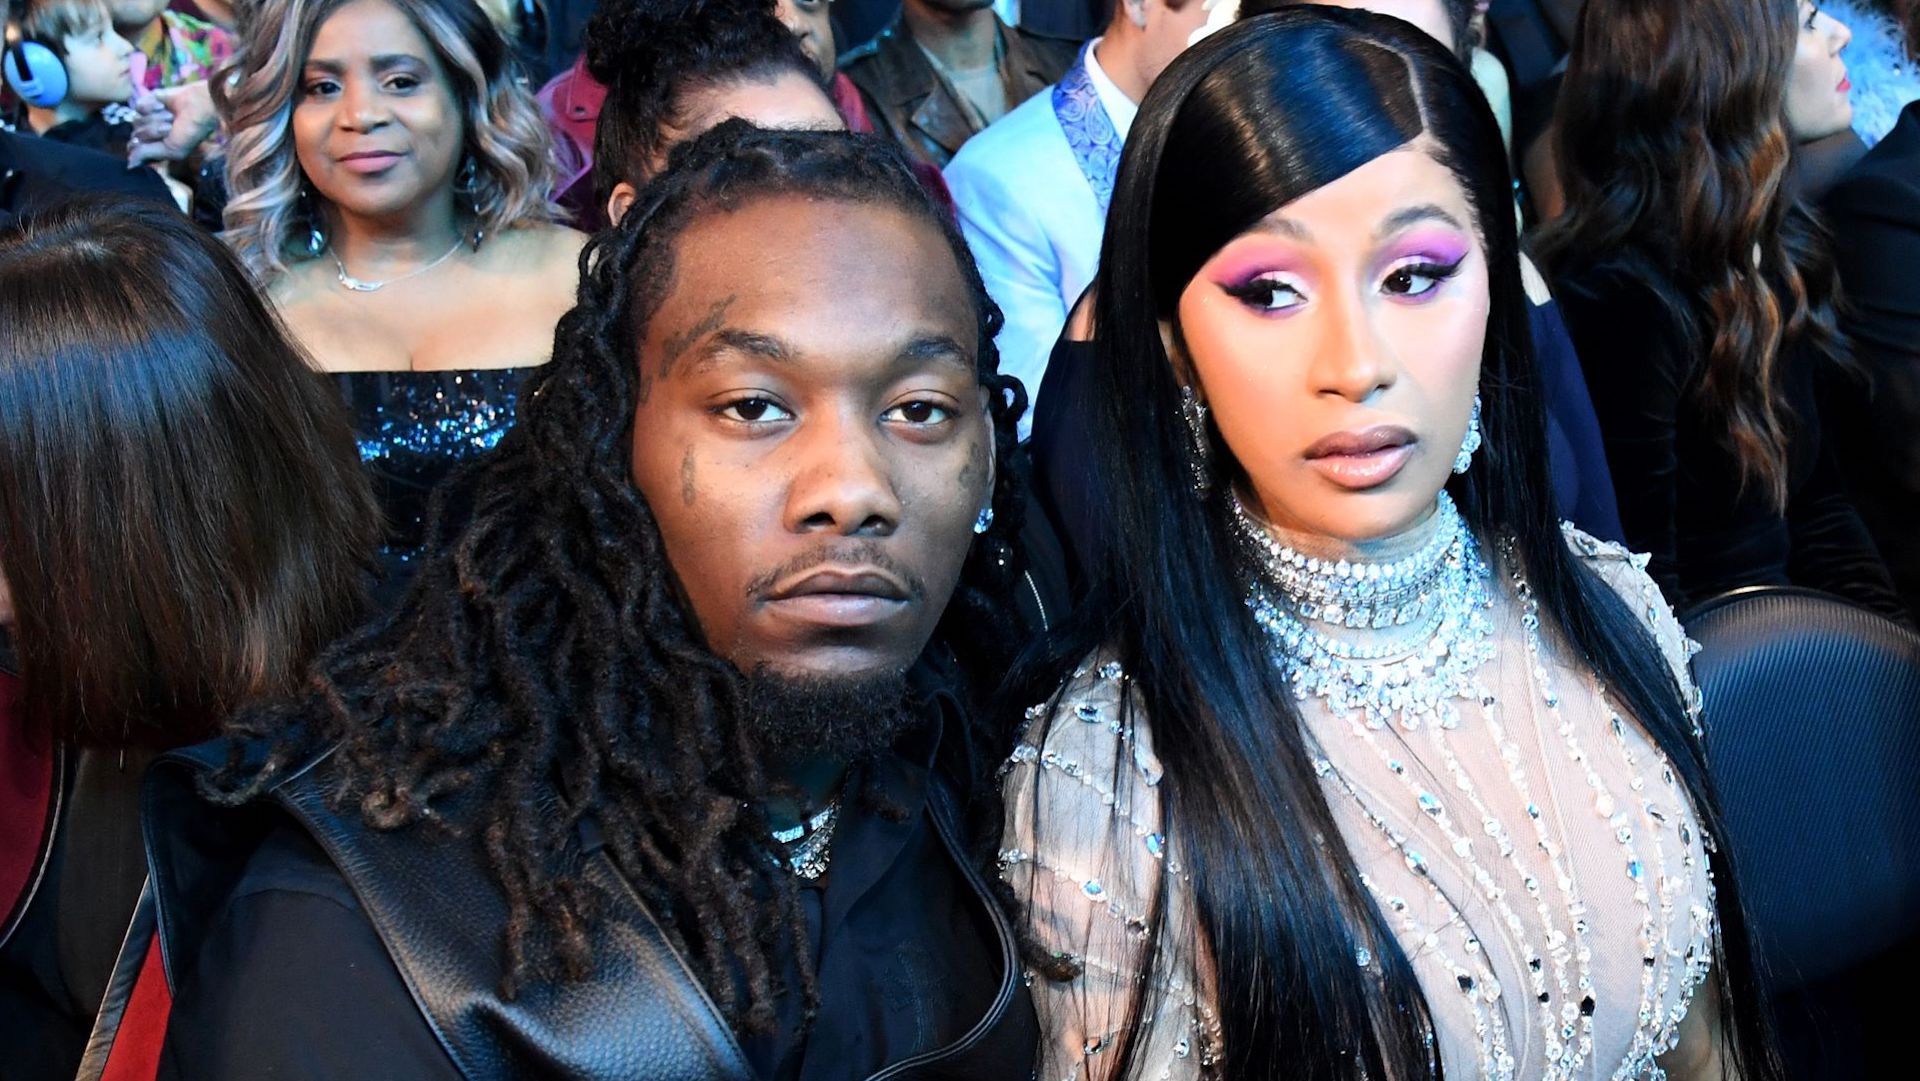 Offset Gifts Cardi B a $375,000 Watch After Her Six Chanel Purses